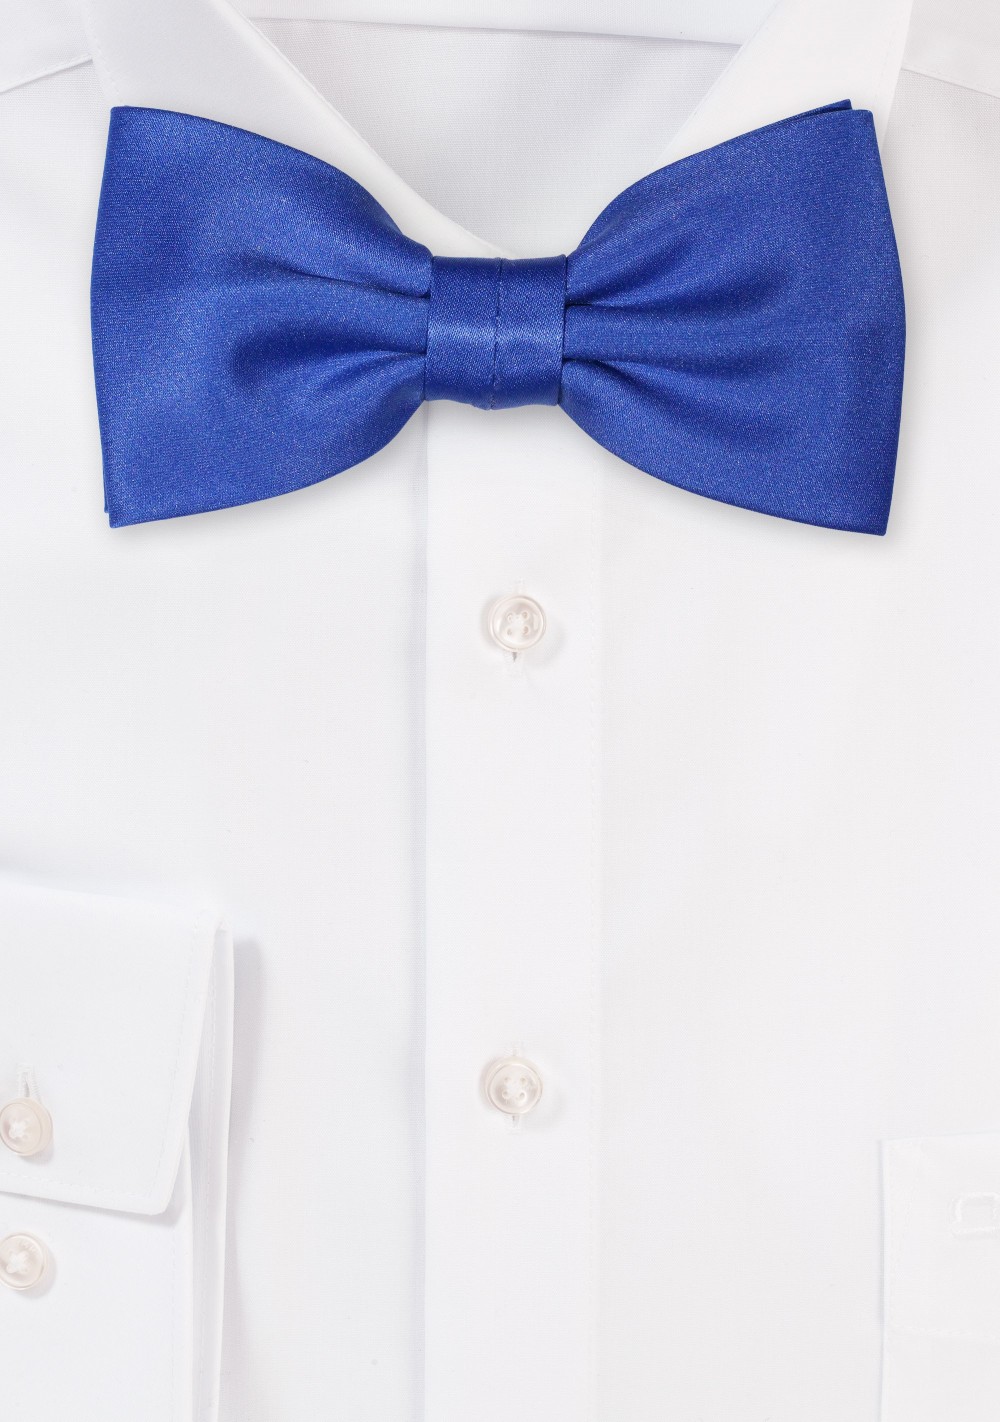 Shiny Bow Tie in Morning Glory Blue